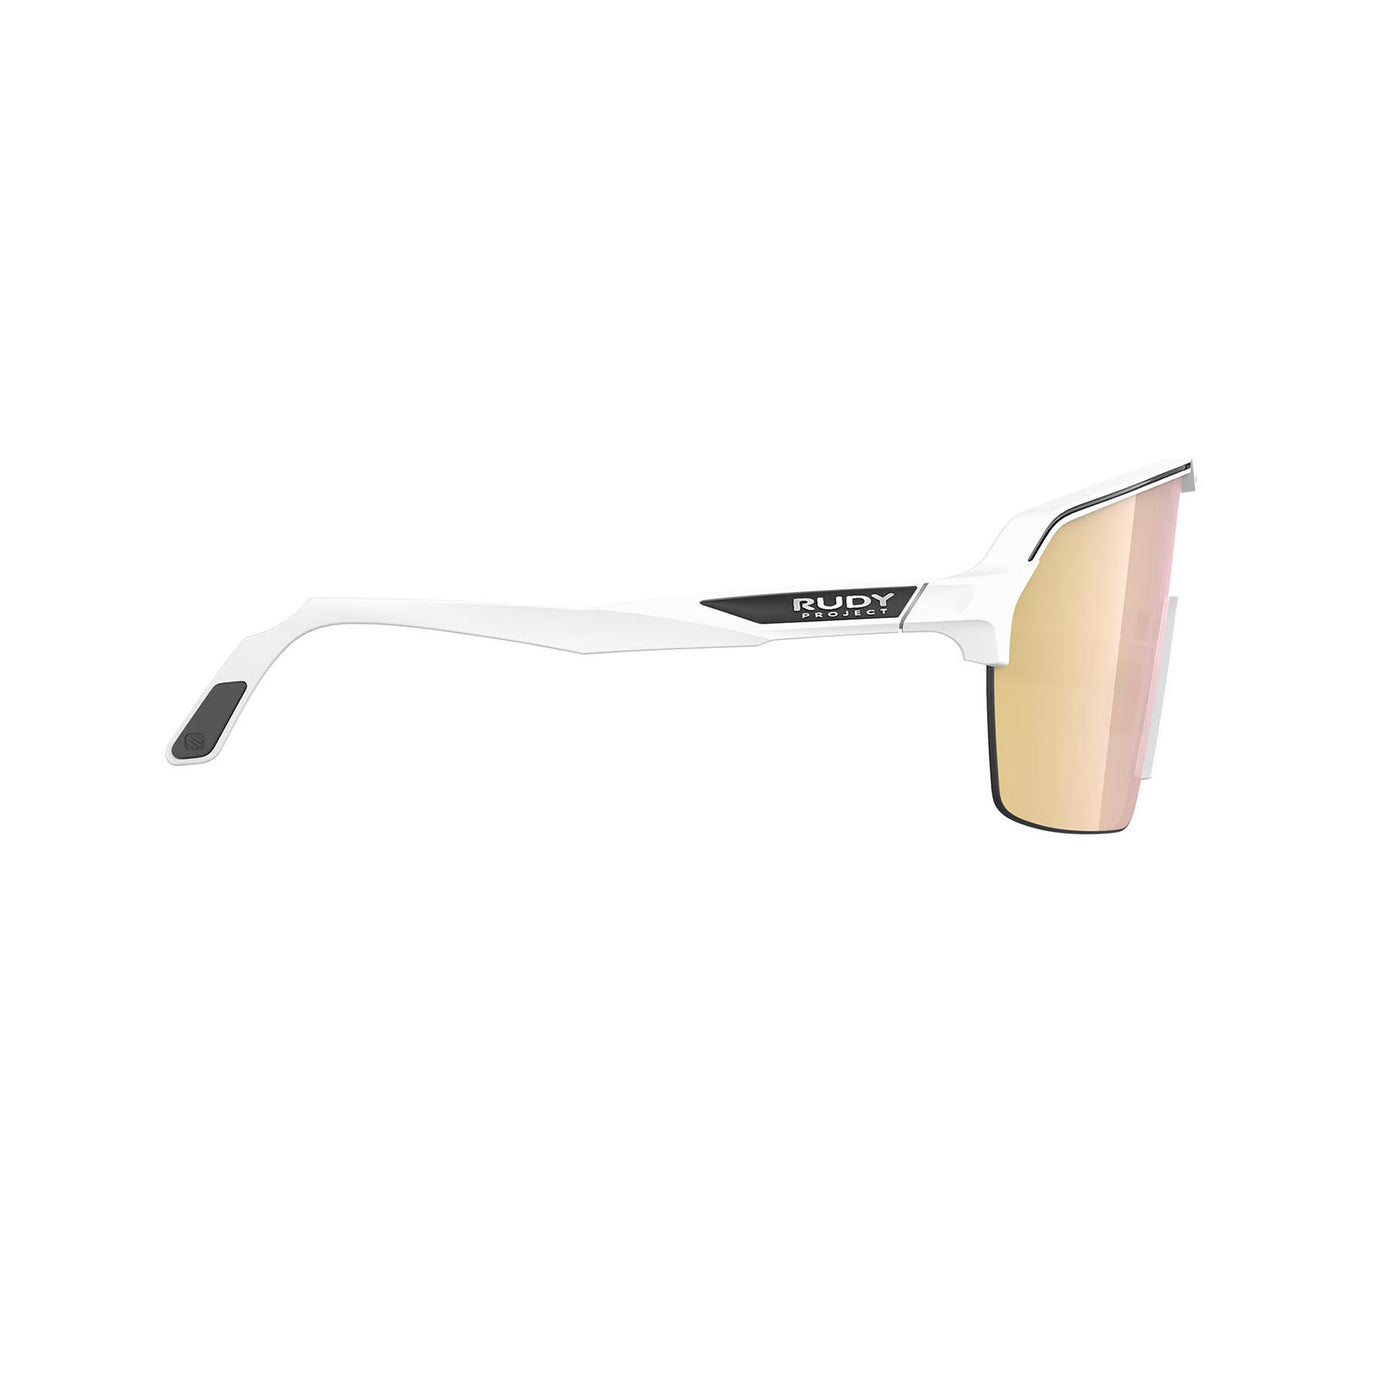 Rudy Project Spinshield Air running and cycling sport shield sunglasses#color_spinshield-air-white-matte-with-multilaser-gold-lenses